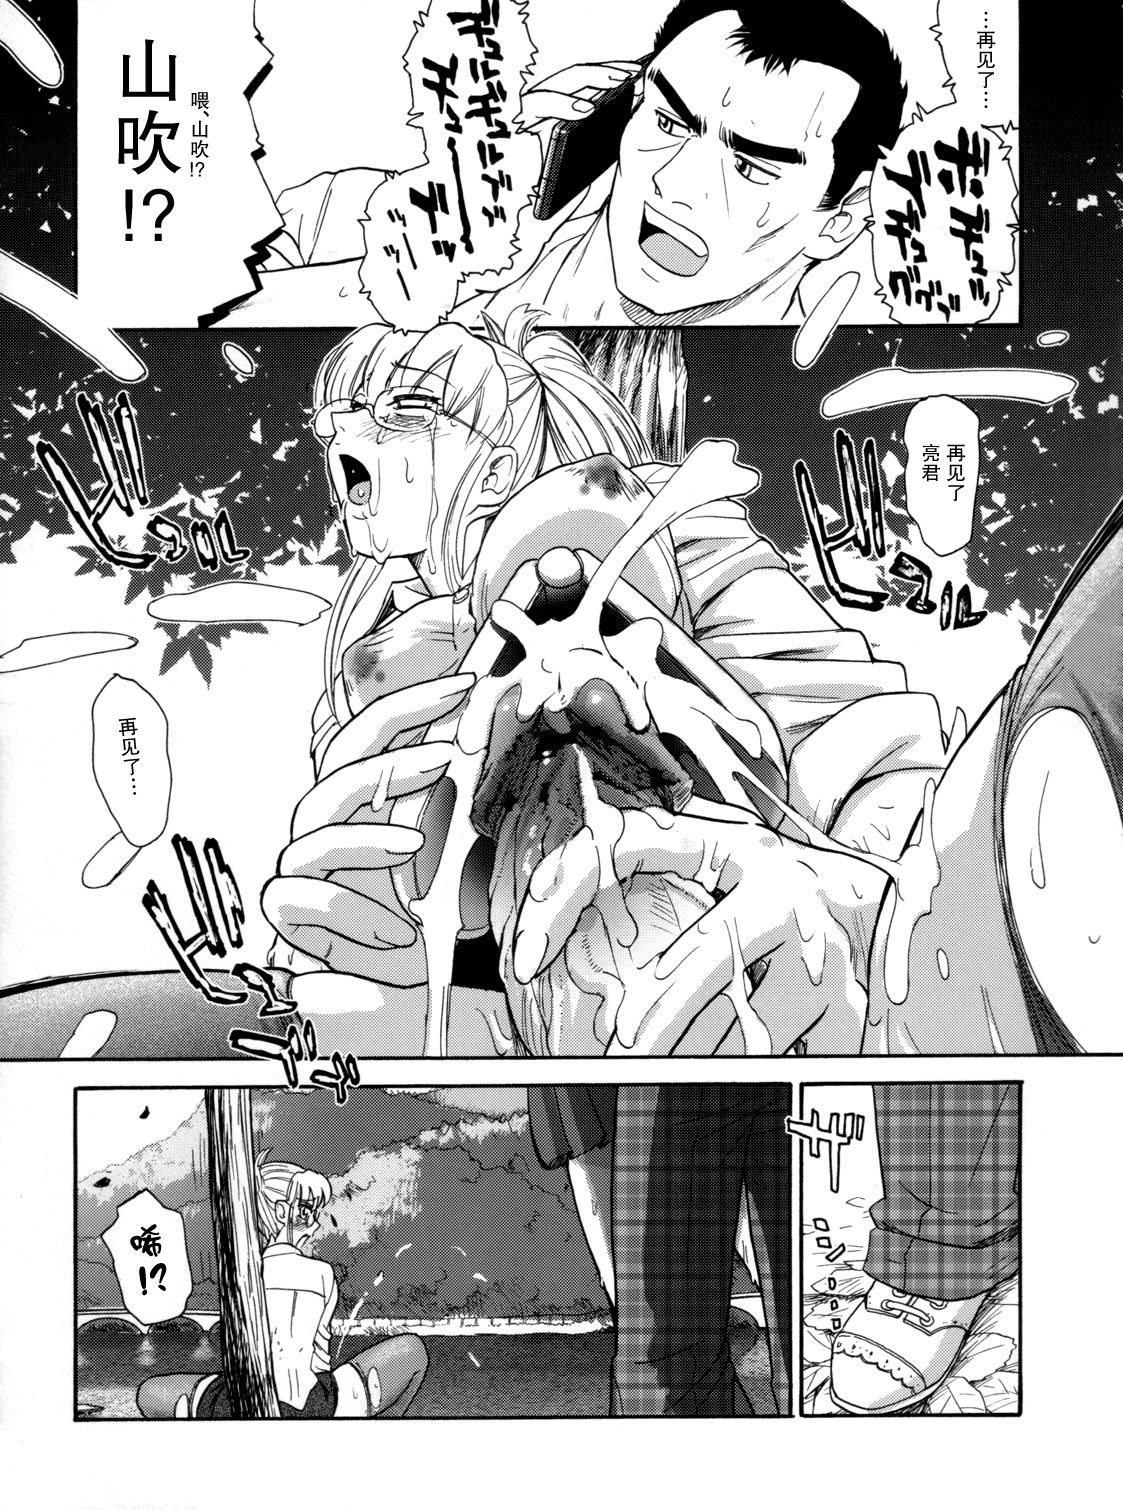 (C72) [Behind Moon (Q)] Dulce Report 9 | 达西报告 9 [Chinese] [哈尼喵汉化组] [Decensored] page 39 full